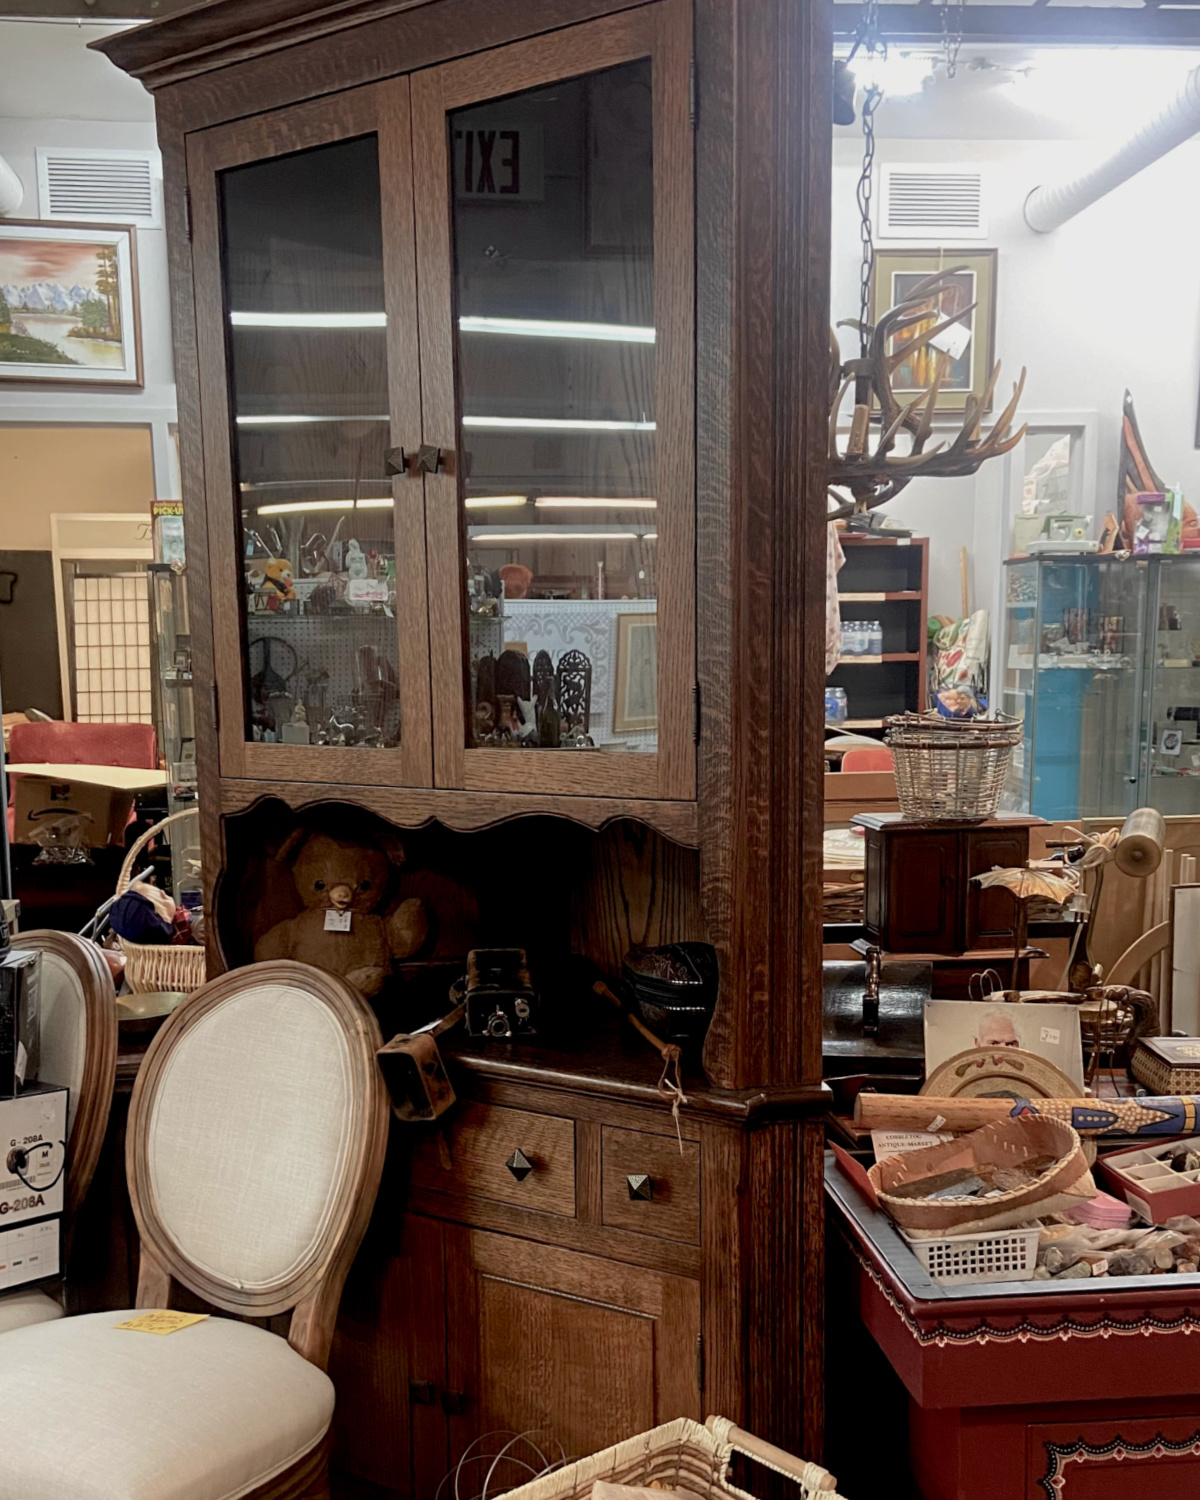 A large antique furniture piece surround by other vintage treasures.